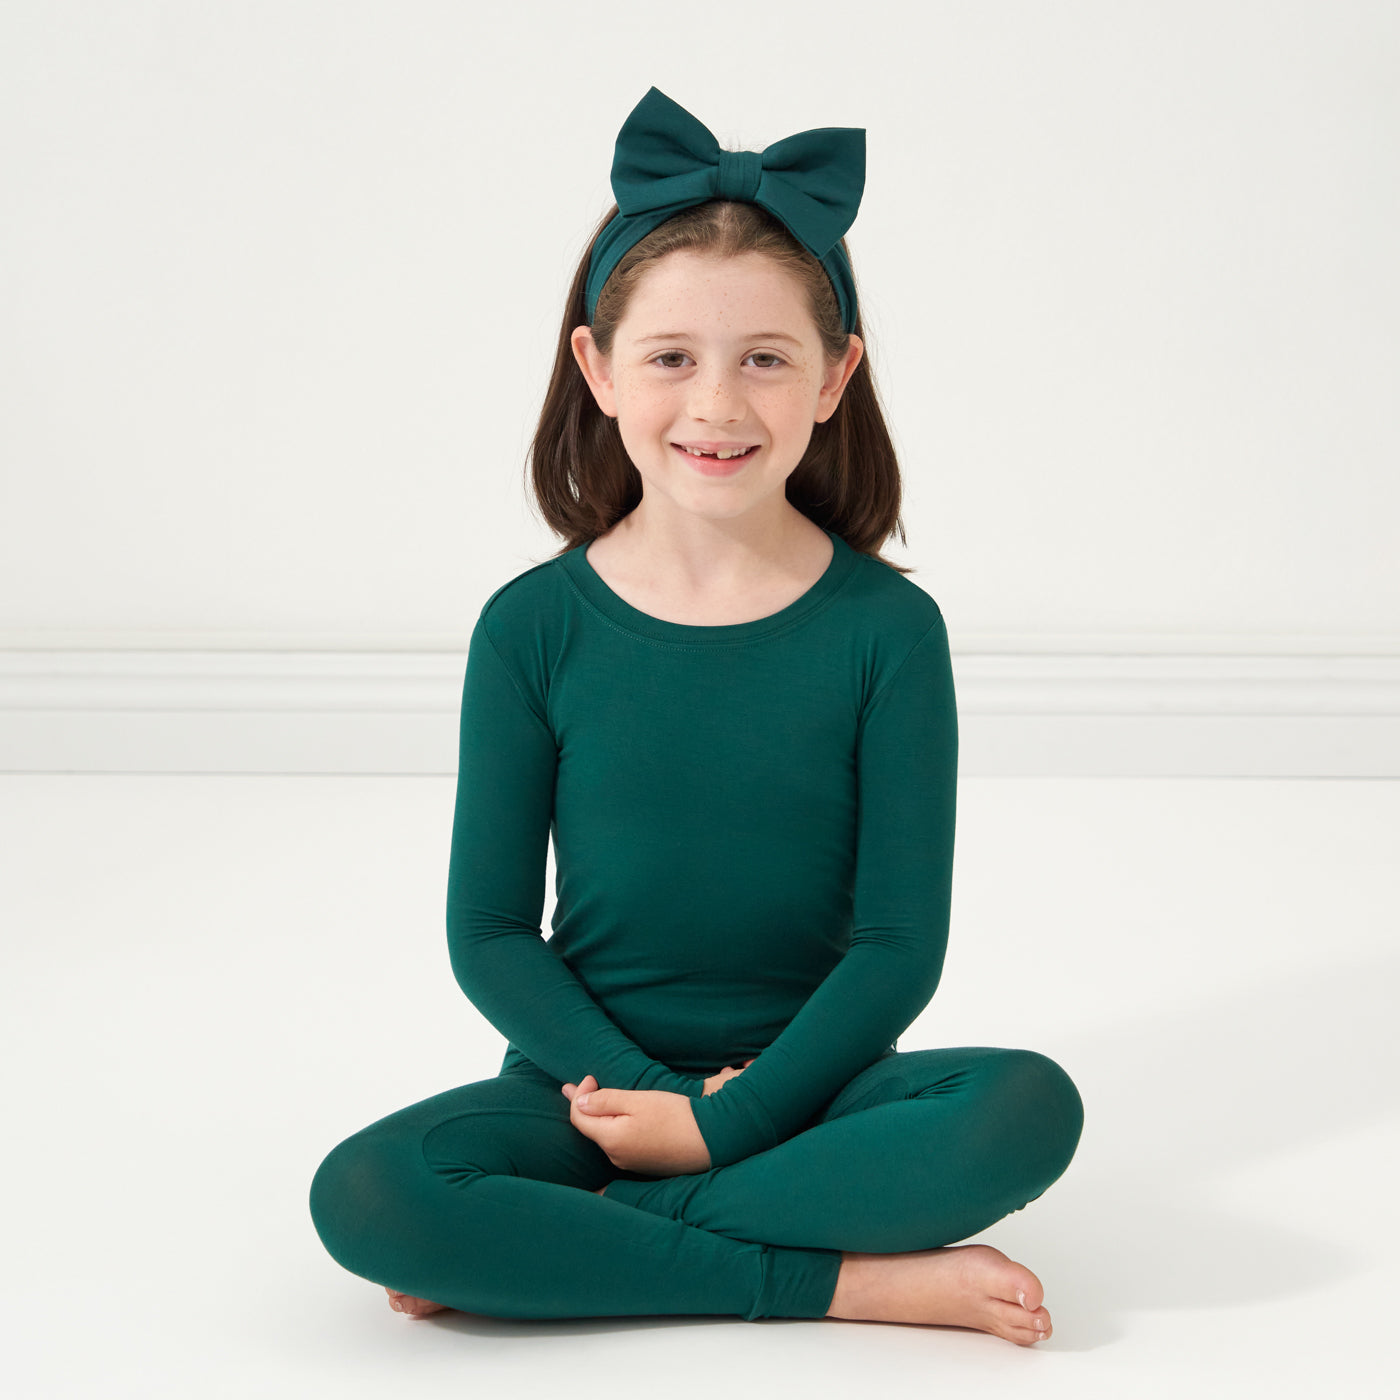 Child wearing an Emerald luxe bow headband and matching pajamas